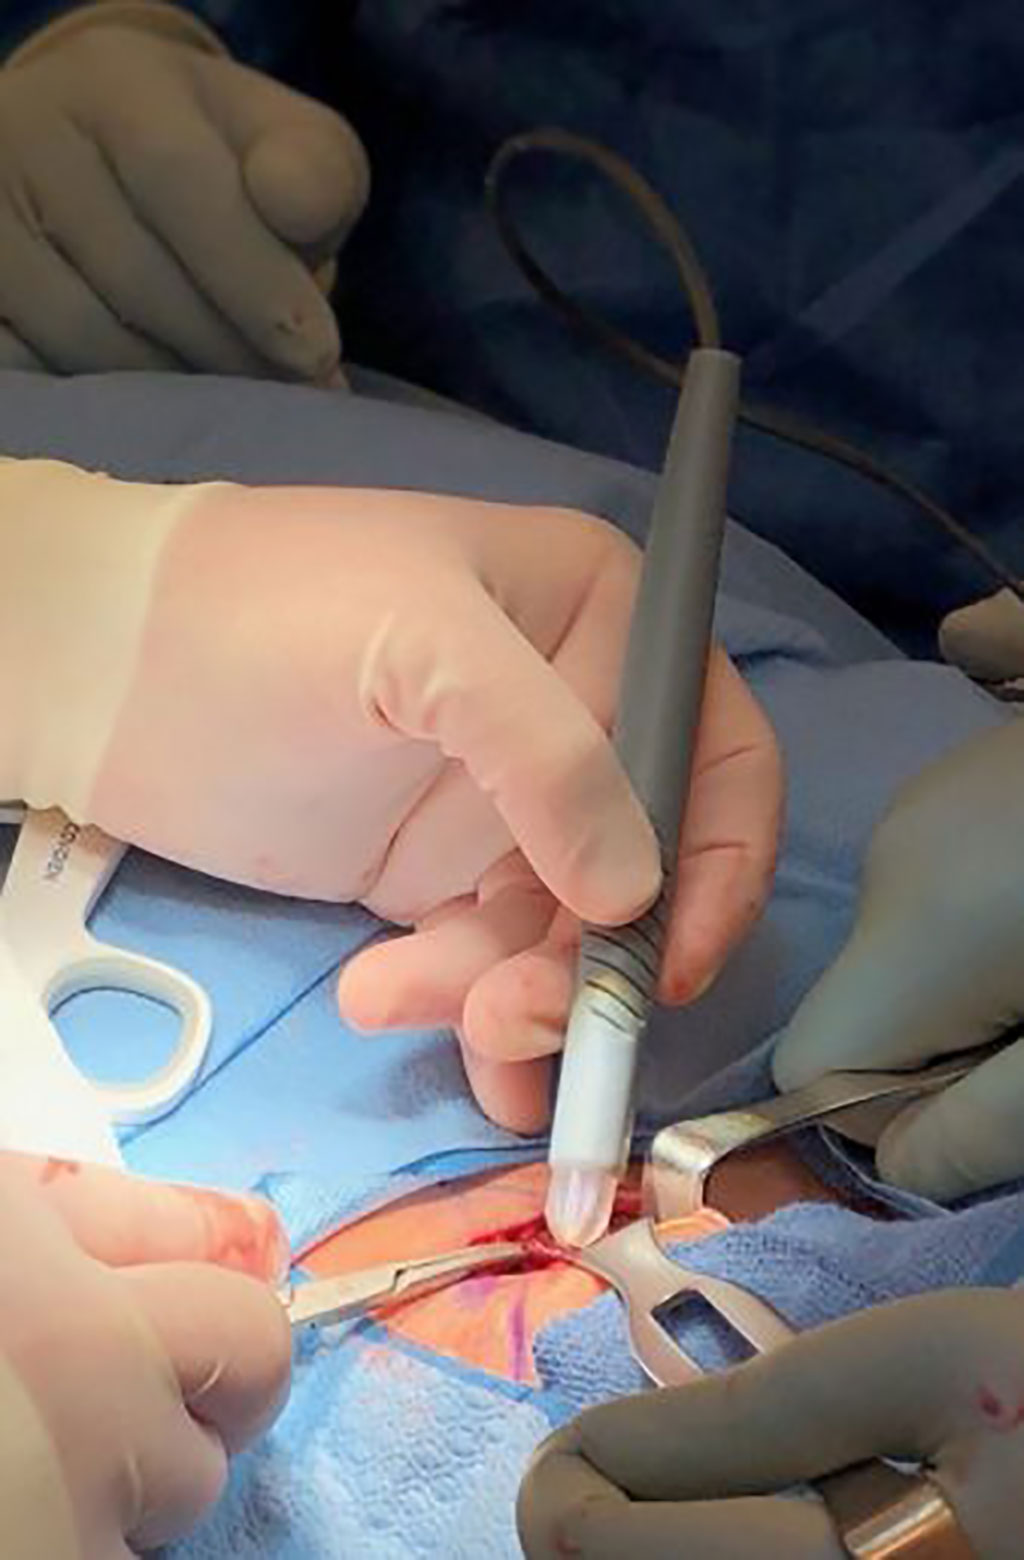 Image: The MasSpec Pen being used to probe tissue during surgery (Photo courtesy of Baylor College of Medicine)